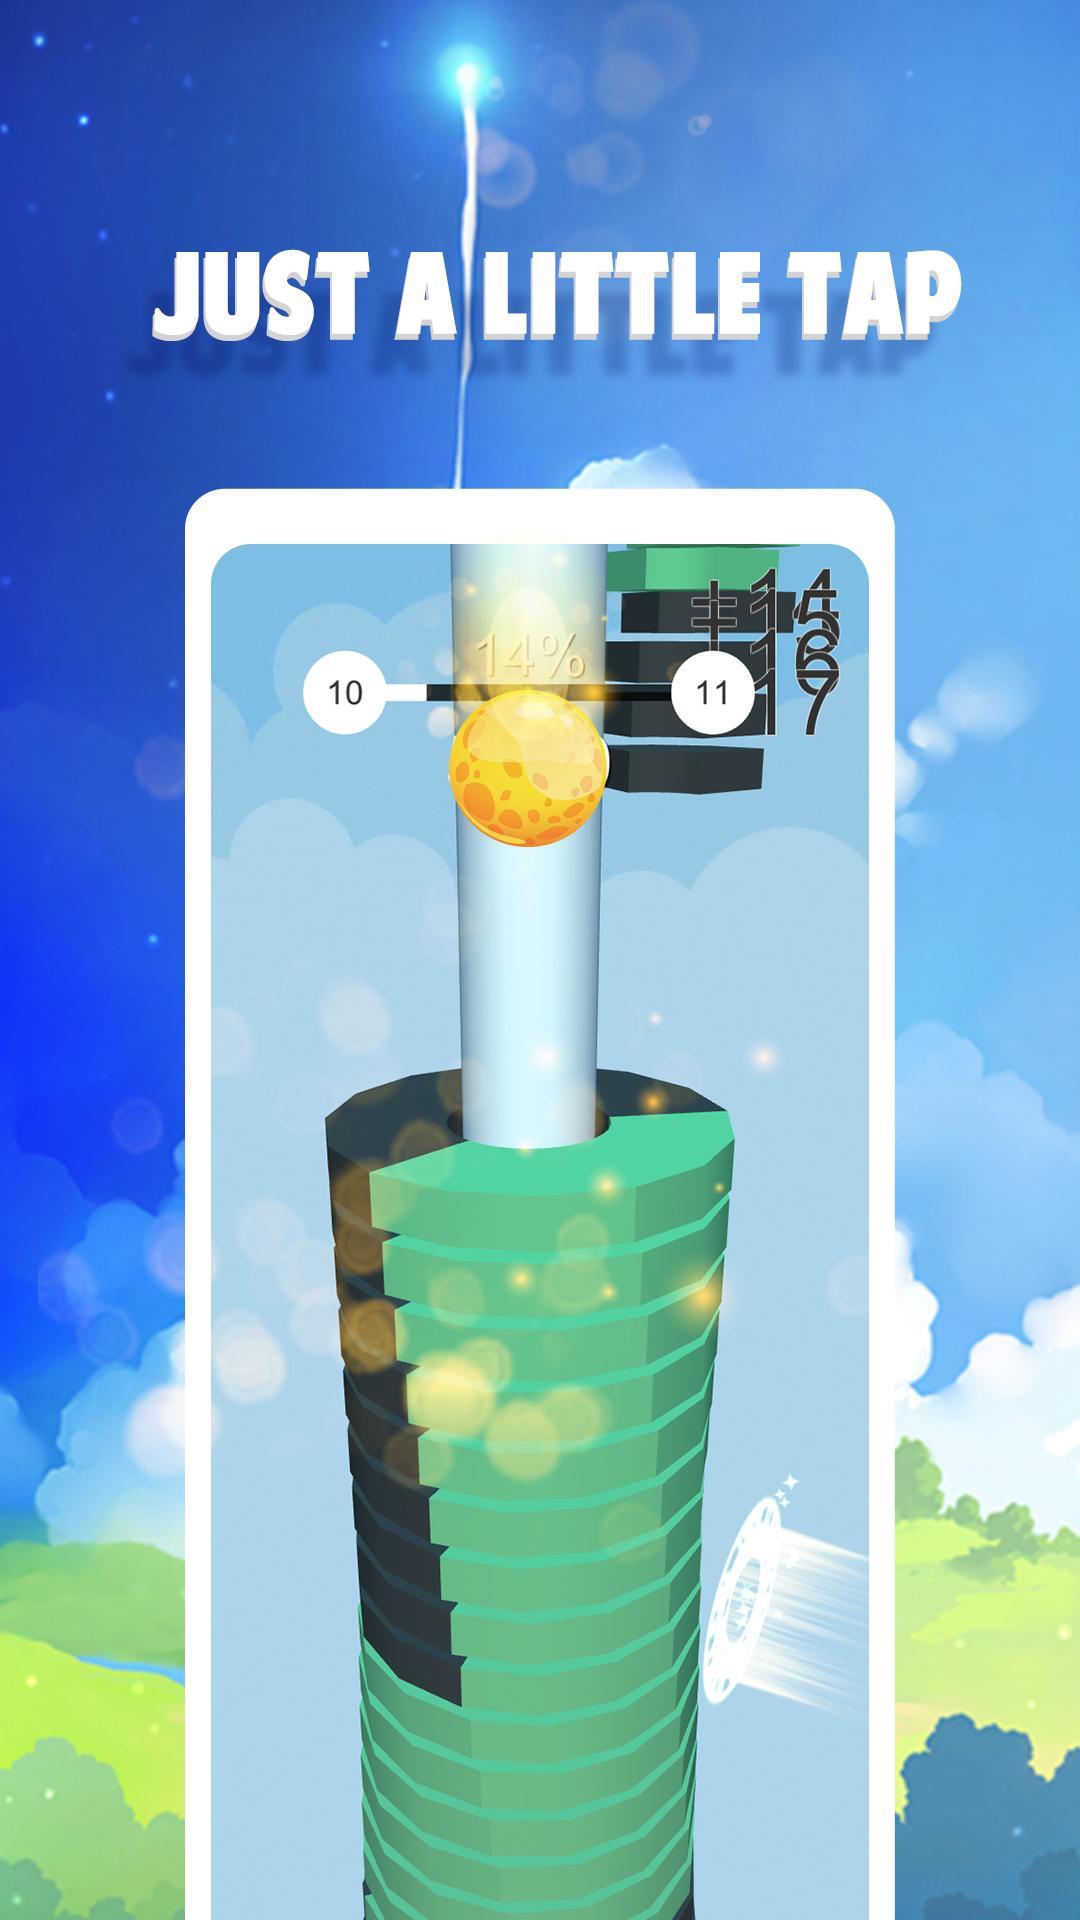 Stack Block Crusher for Android - APK Download